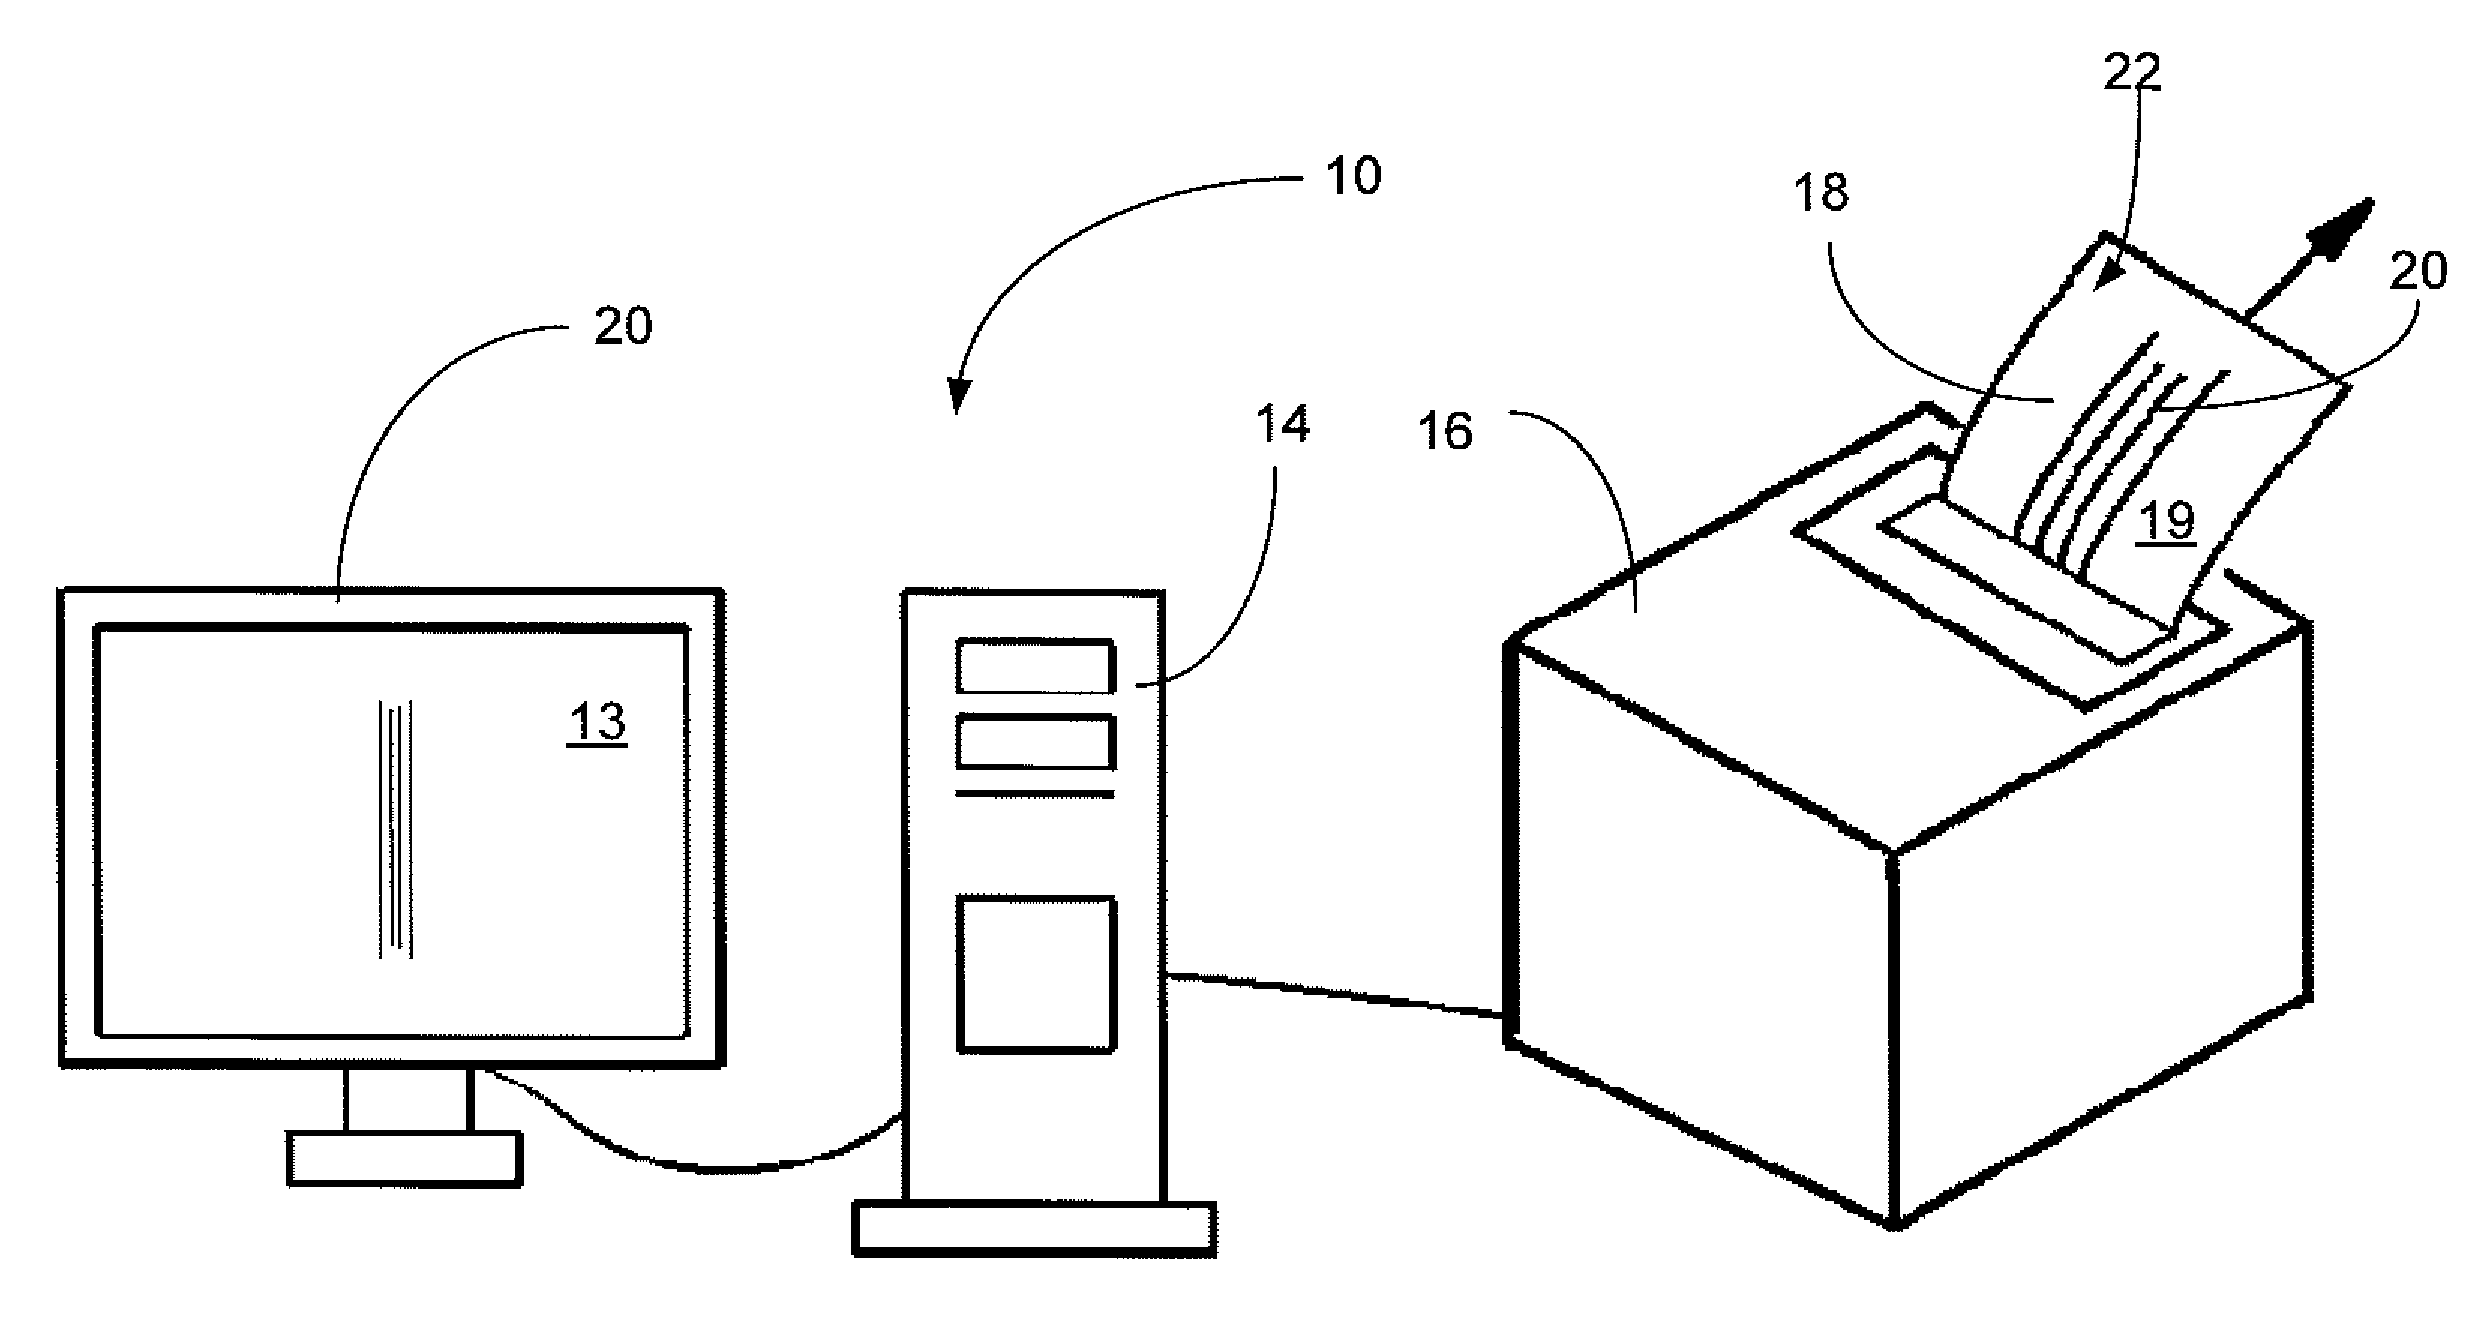 Process for producing and applying a laser heat transfer capable of printing on flat, cylindrical, curved, and irregularly shaped objects